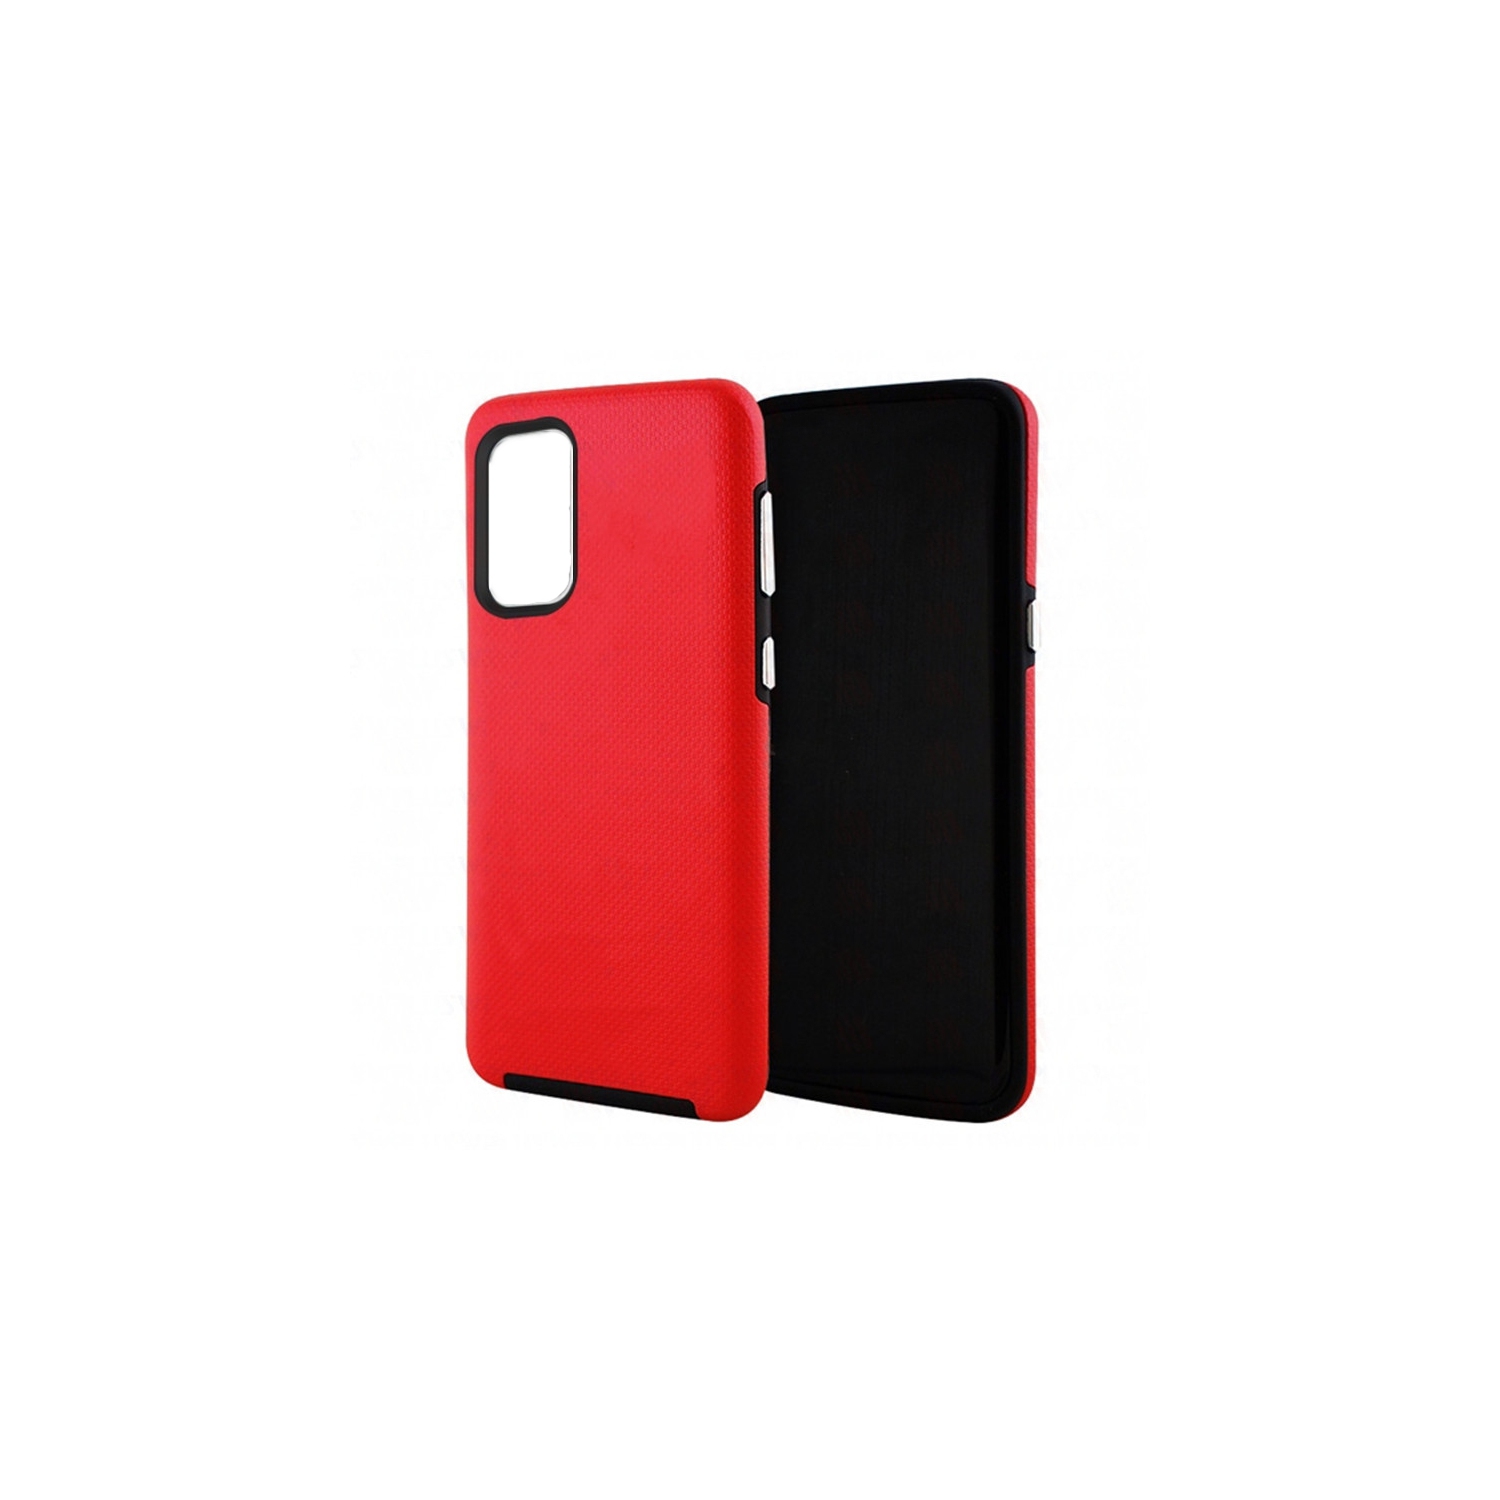 【CSmart】 Slim Fitted Hybrid Hard PC Shell Shockproof Scratch Resistant Case Cover for Samsung Galaxy A52 5G, Red